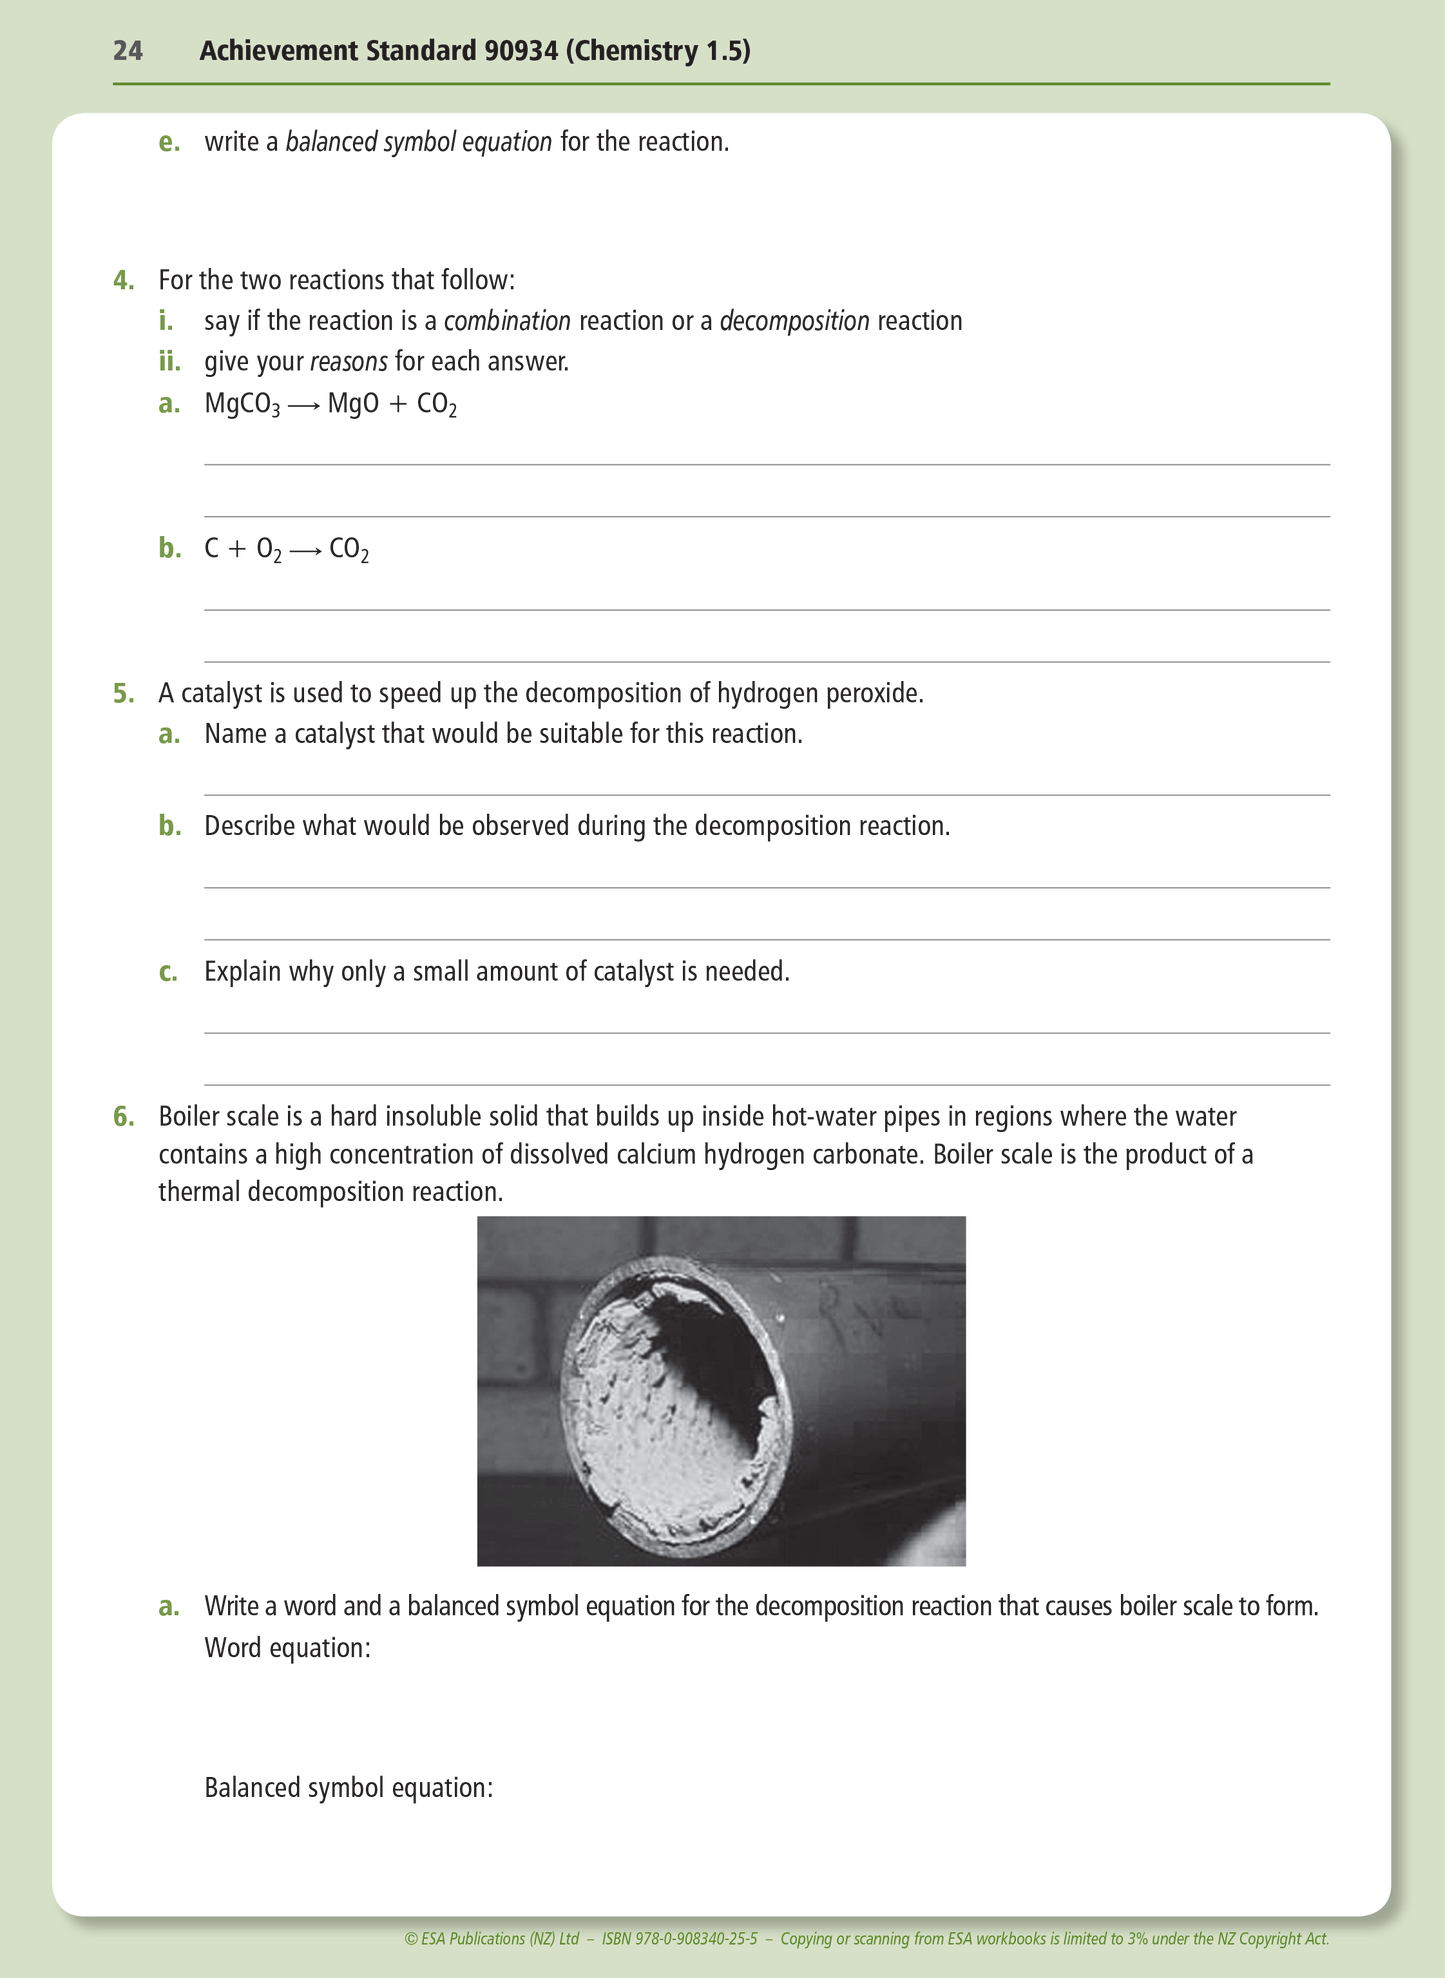 Level 1 Chemical Reactions 1.5 Learning Workbook